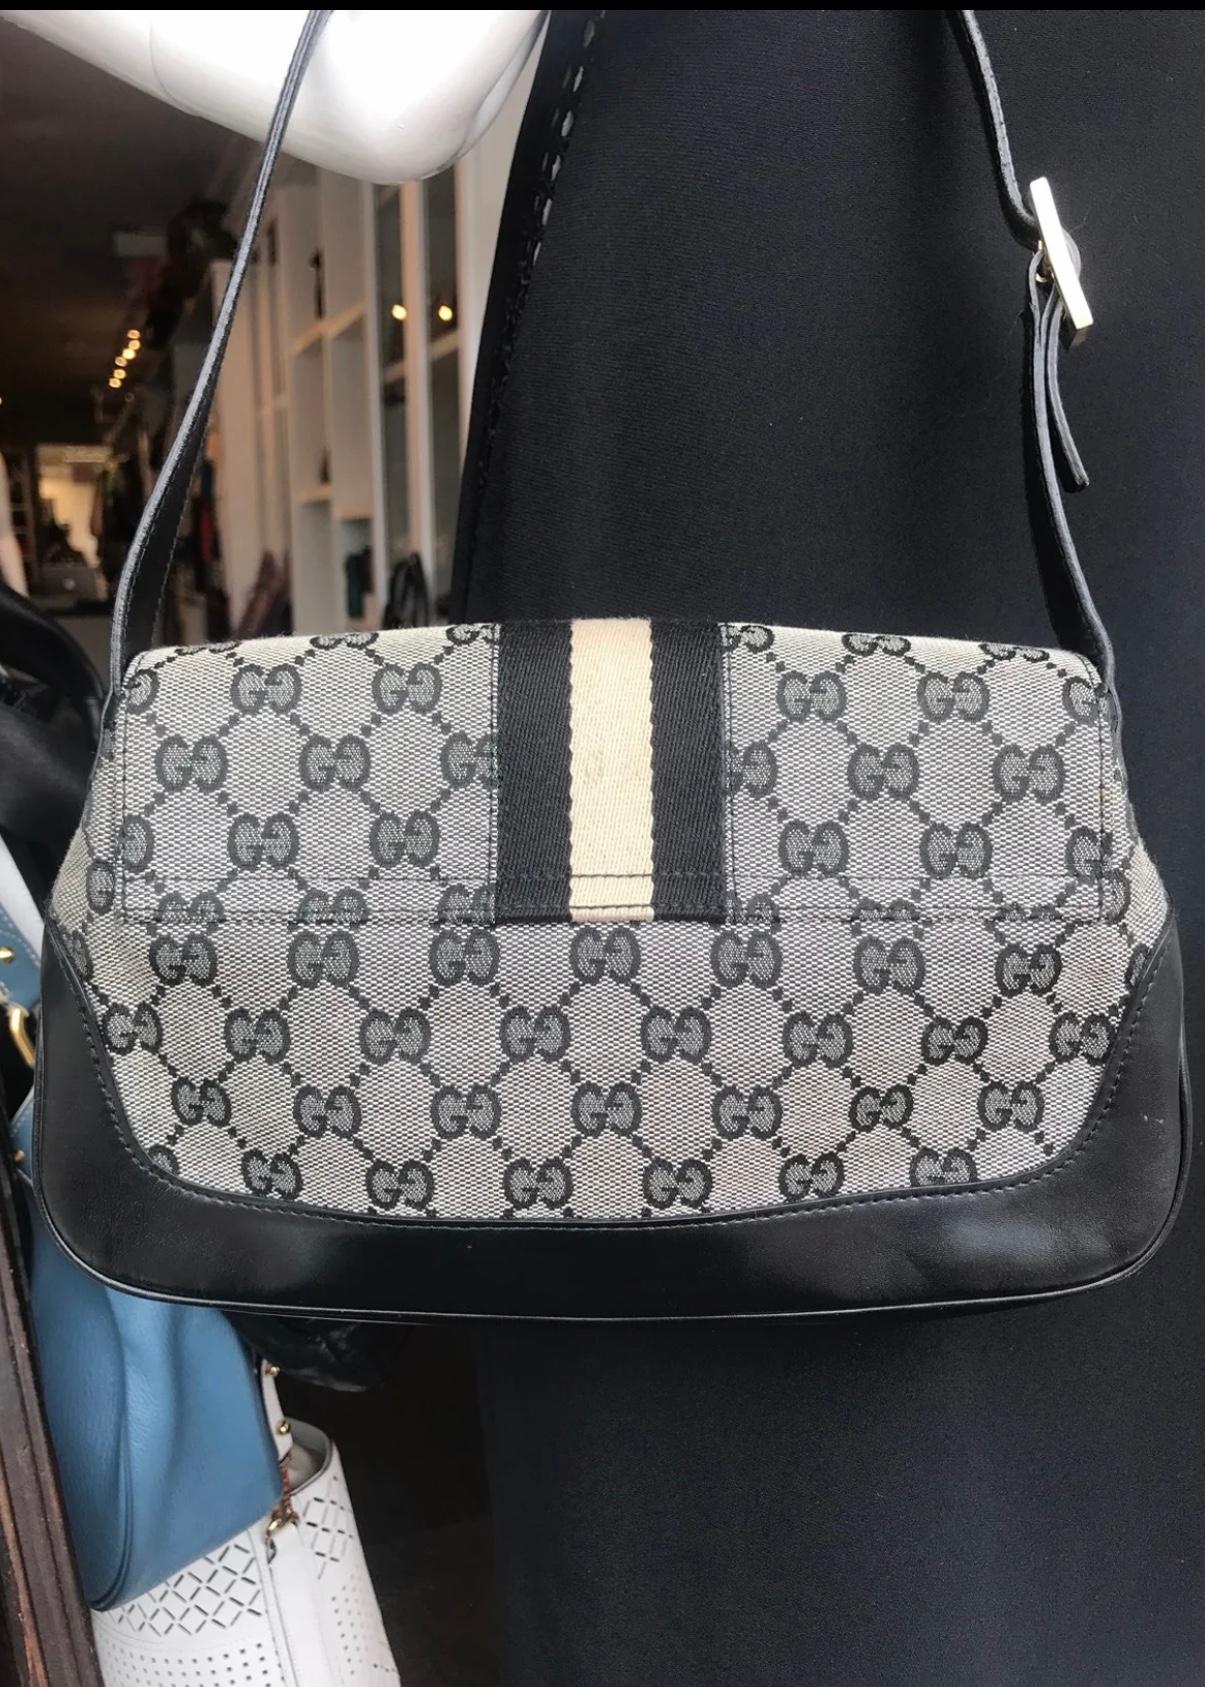 Gucci Canvas Front Flap Shoulder Bag In Good Condition For Sale In Roslyn, NY